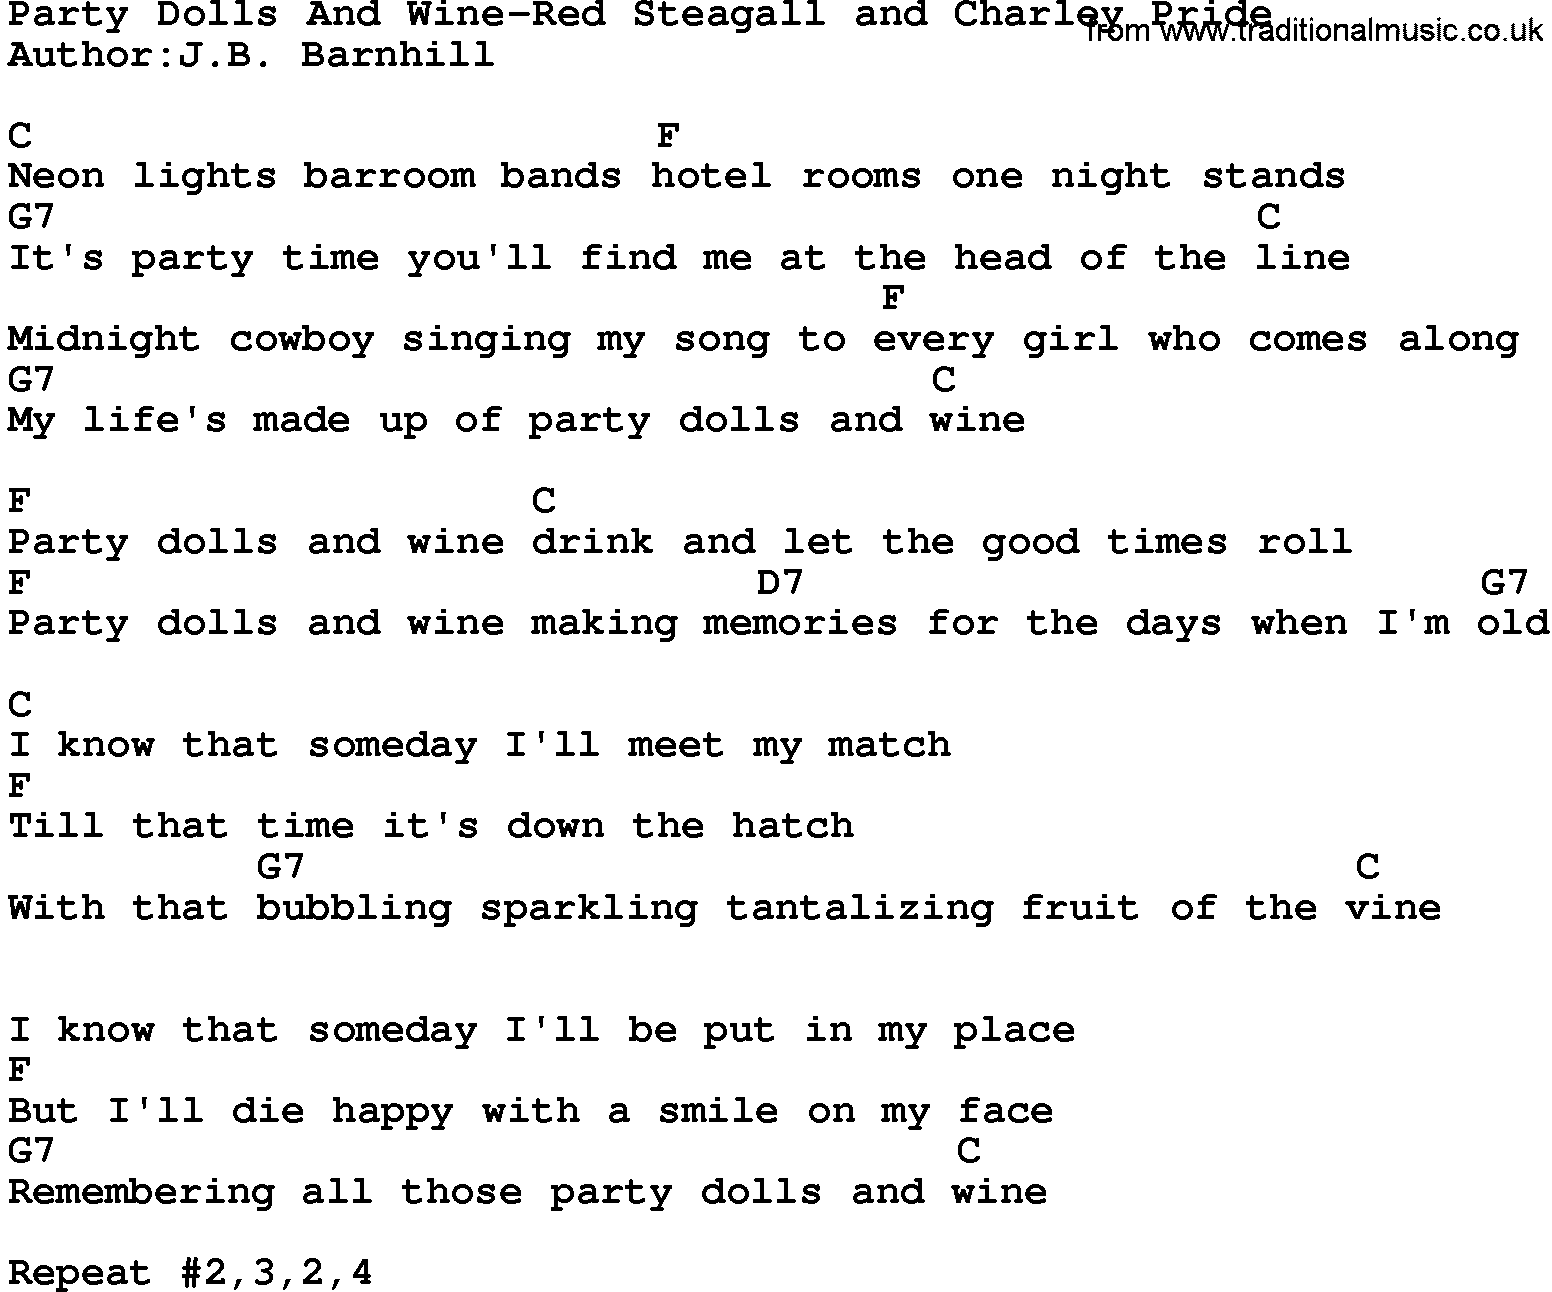 Country music song: Party Dolls And Wine-Red Steagall And Charley Pride lyrics and chords